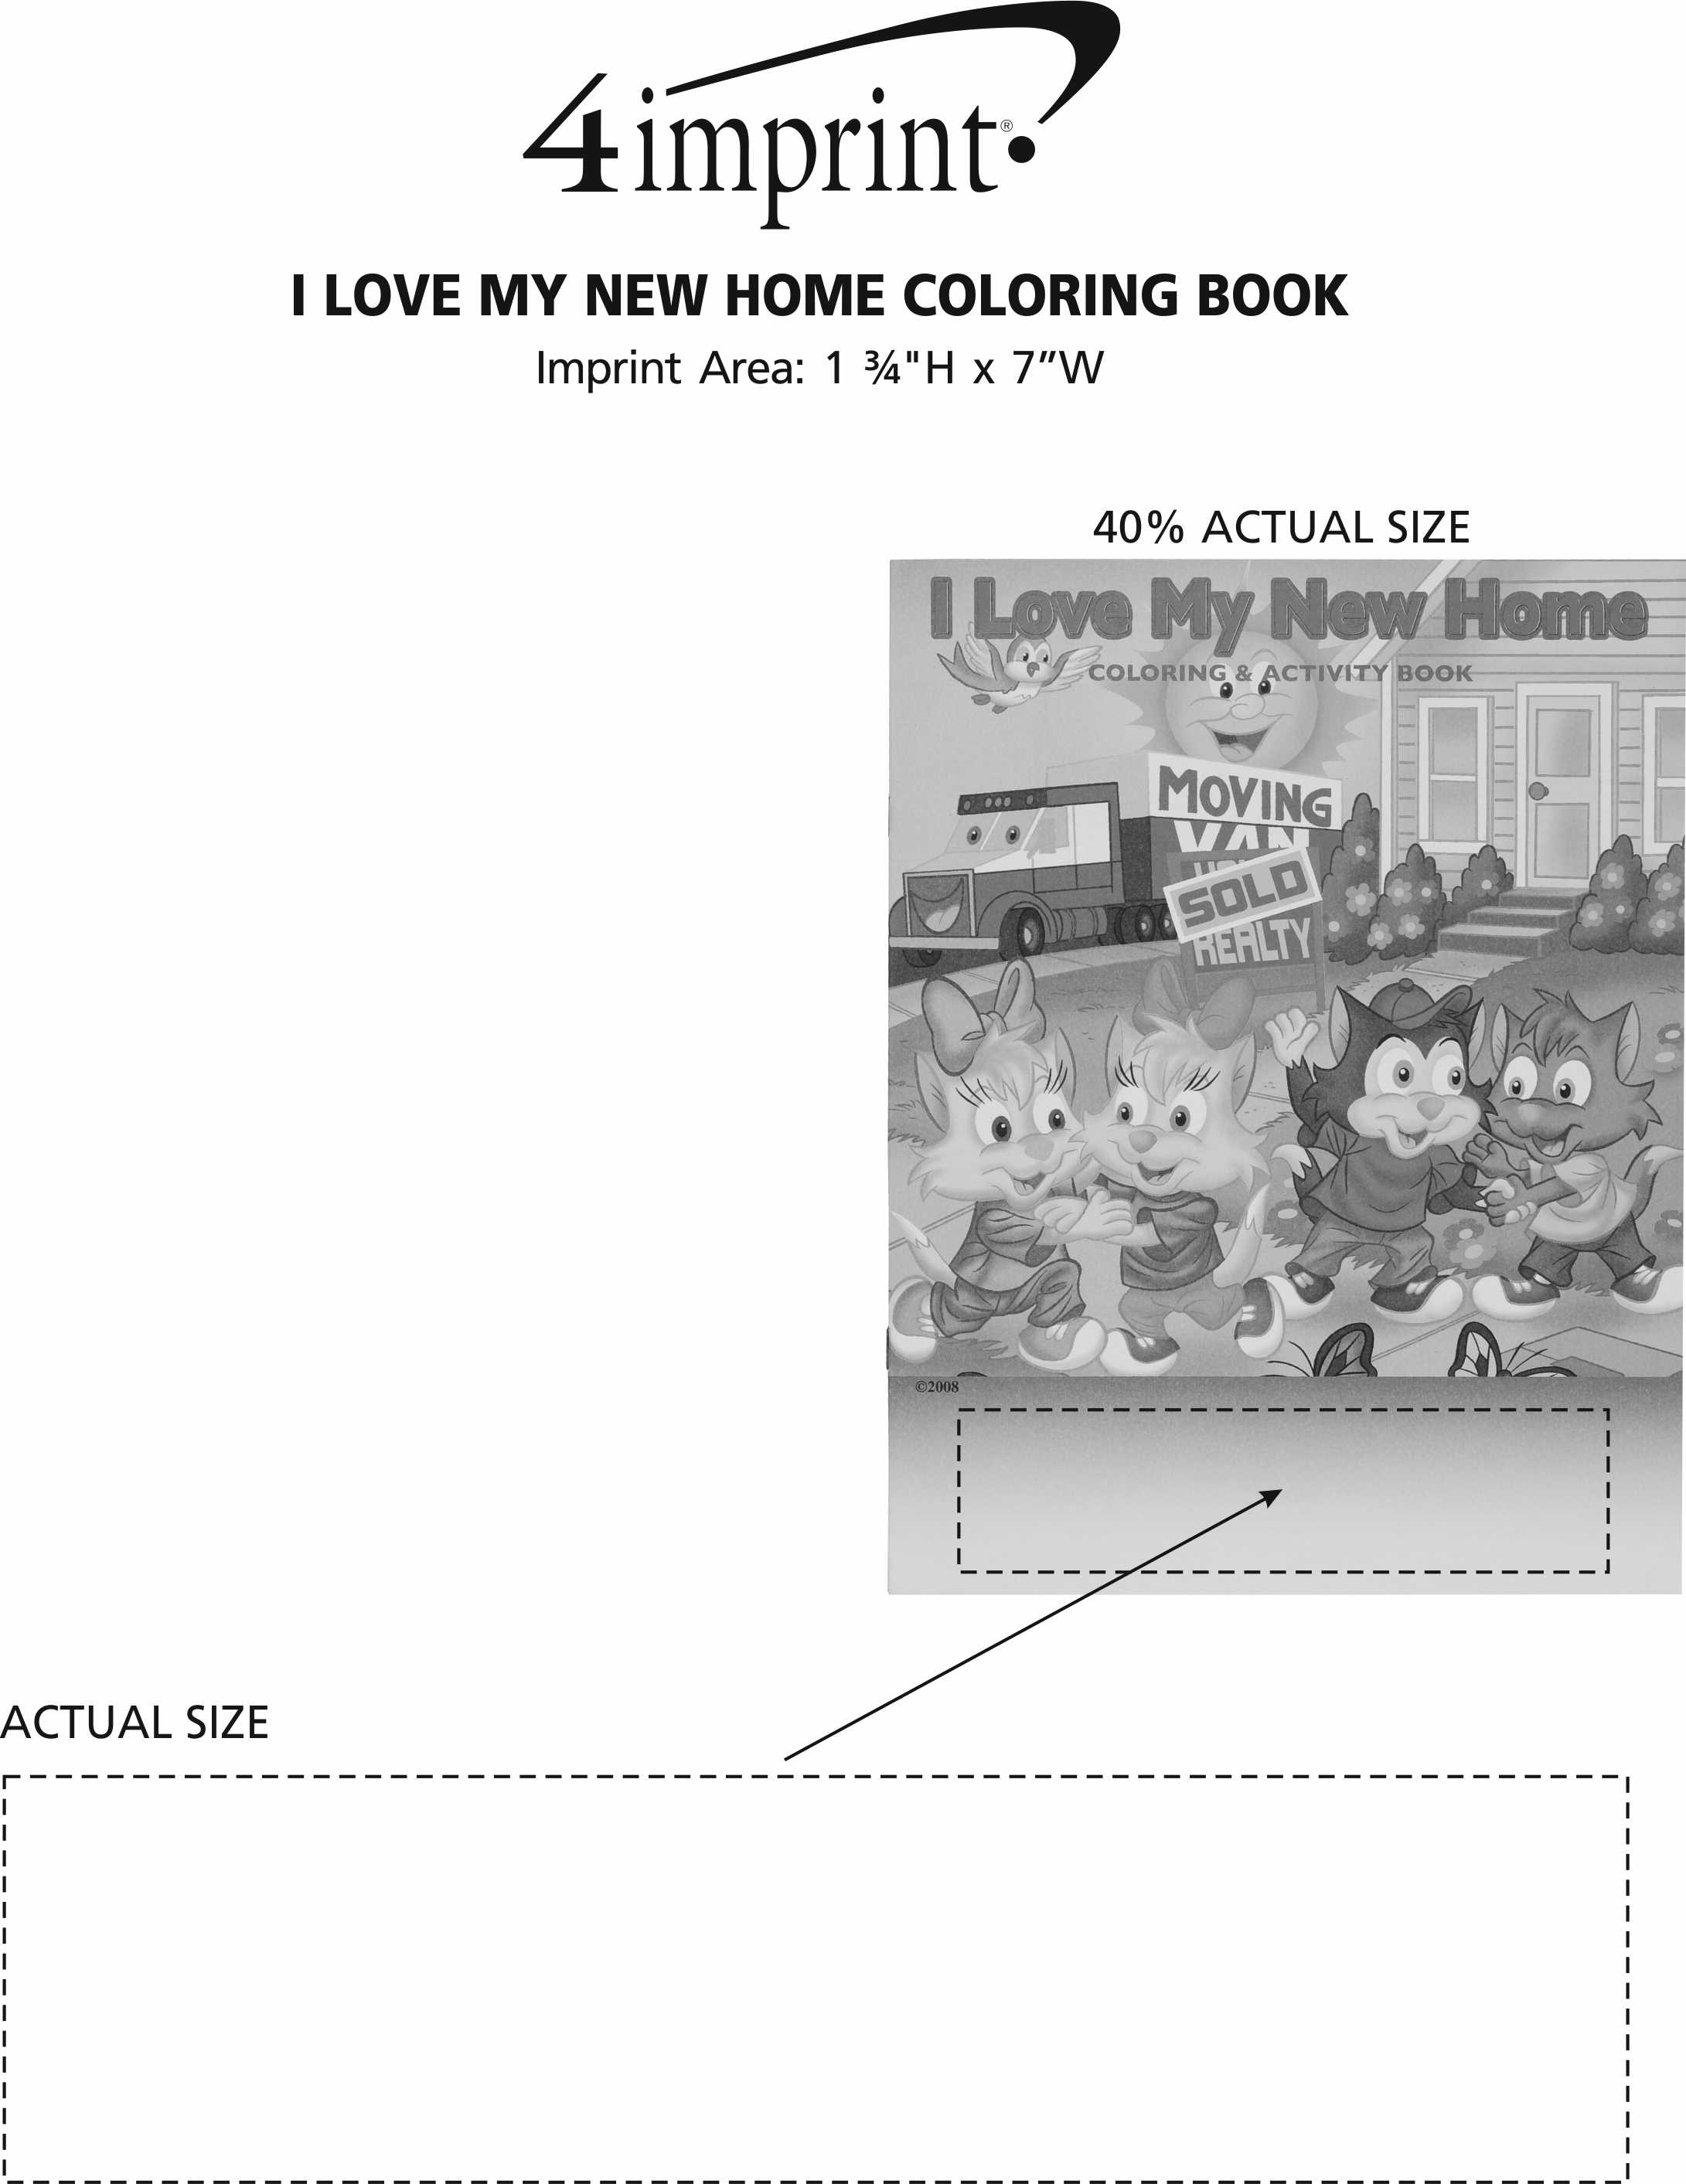 Imprint Area of I Love My New Home Coloring Book